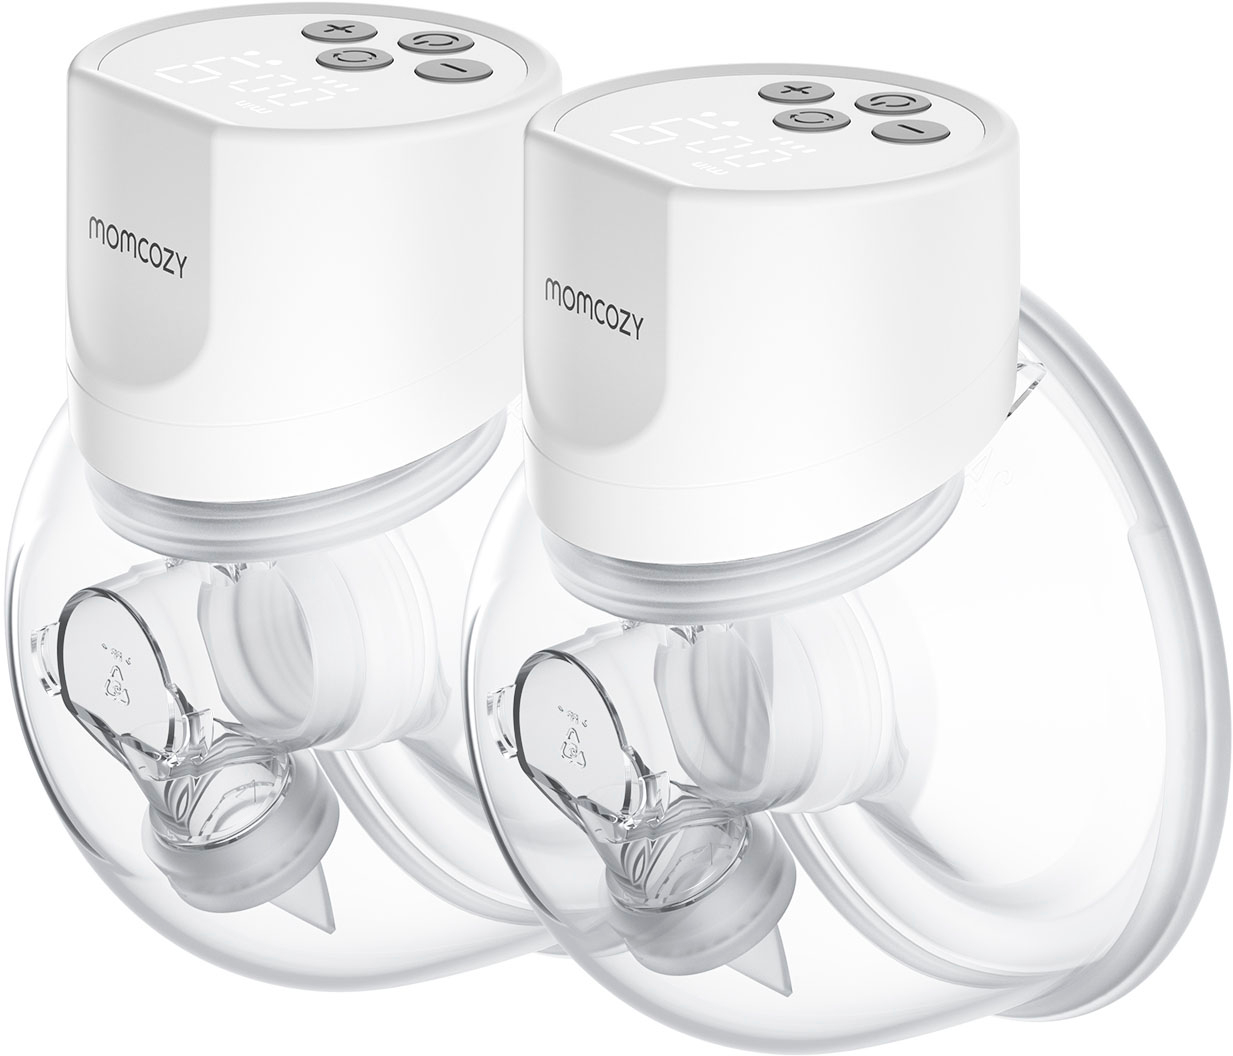 The 3 Best Pumping Bra Options for the Momcozy M5 Breast Pump and